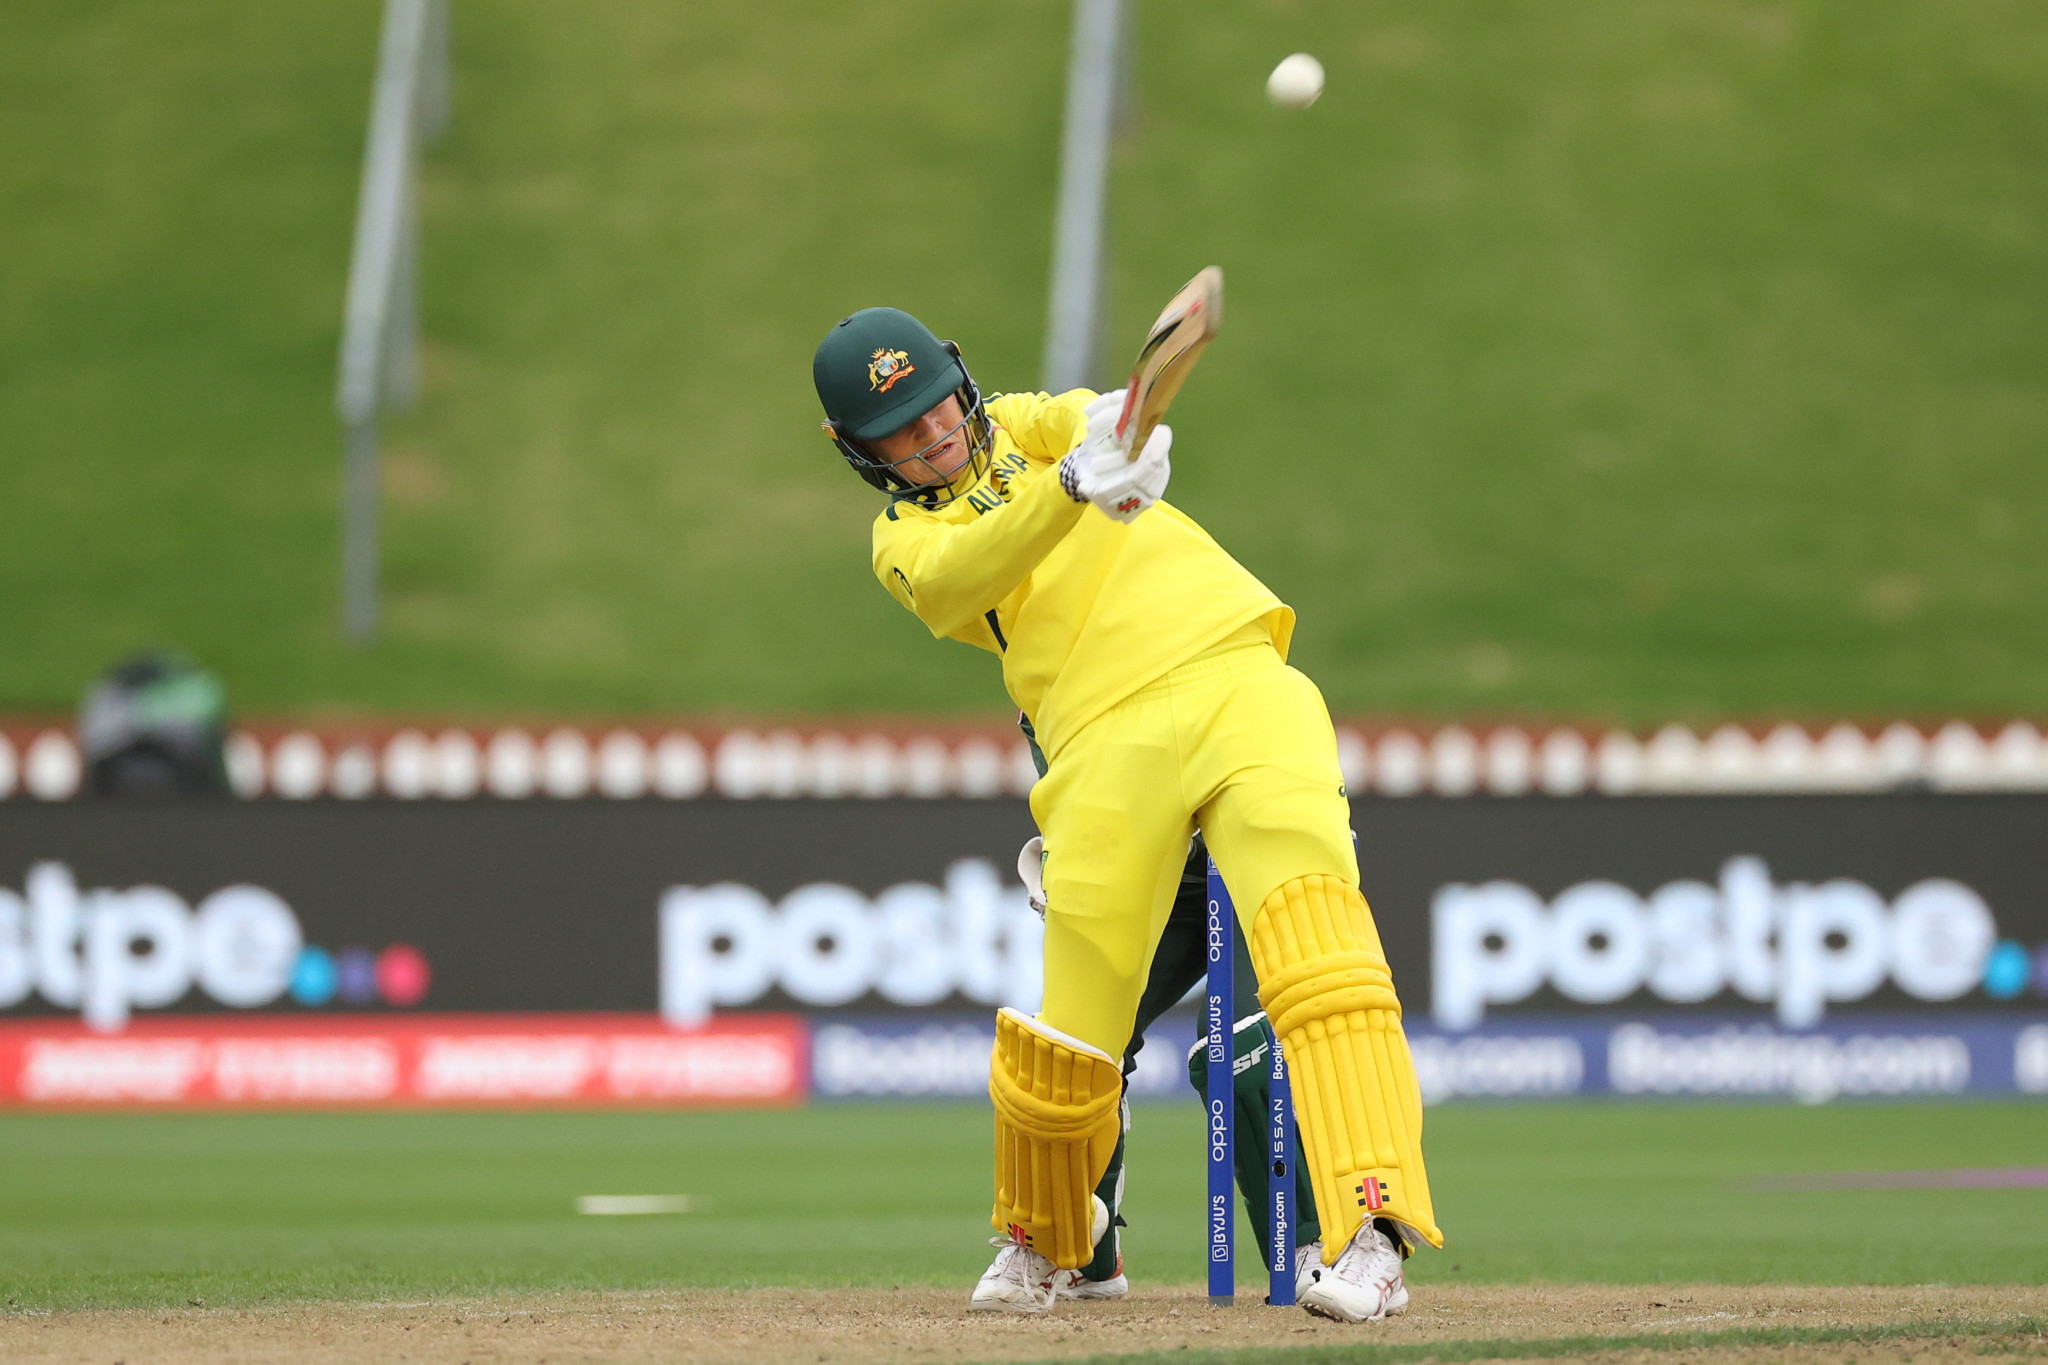 Australia finish Women’s Cricket World Cup group stage unbeaten with victory against Bangladesh